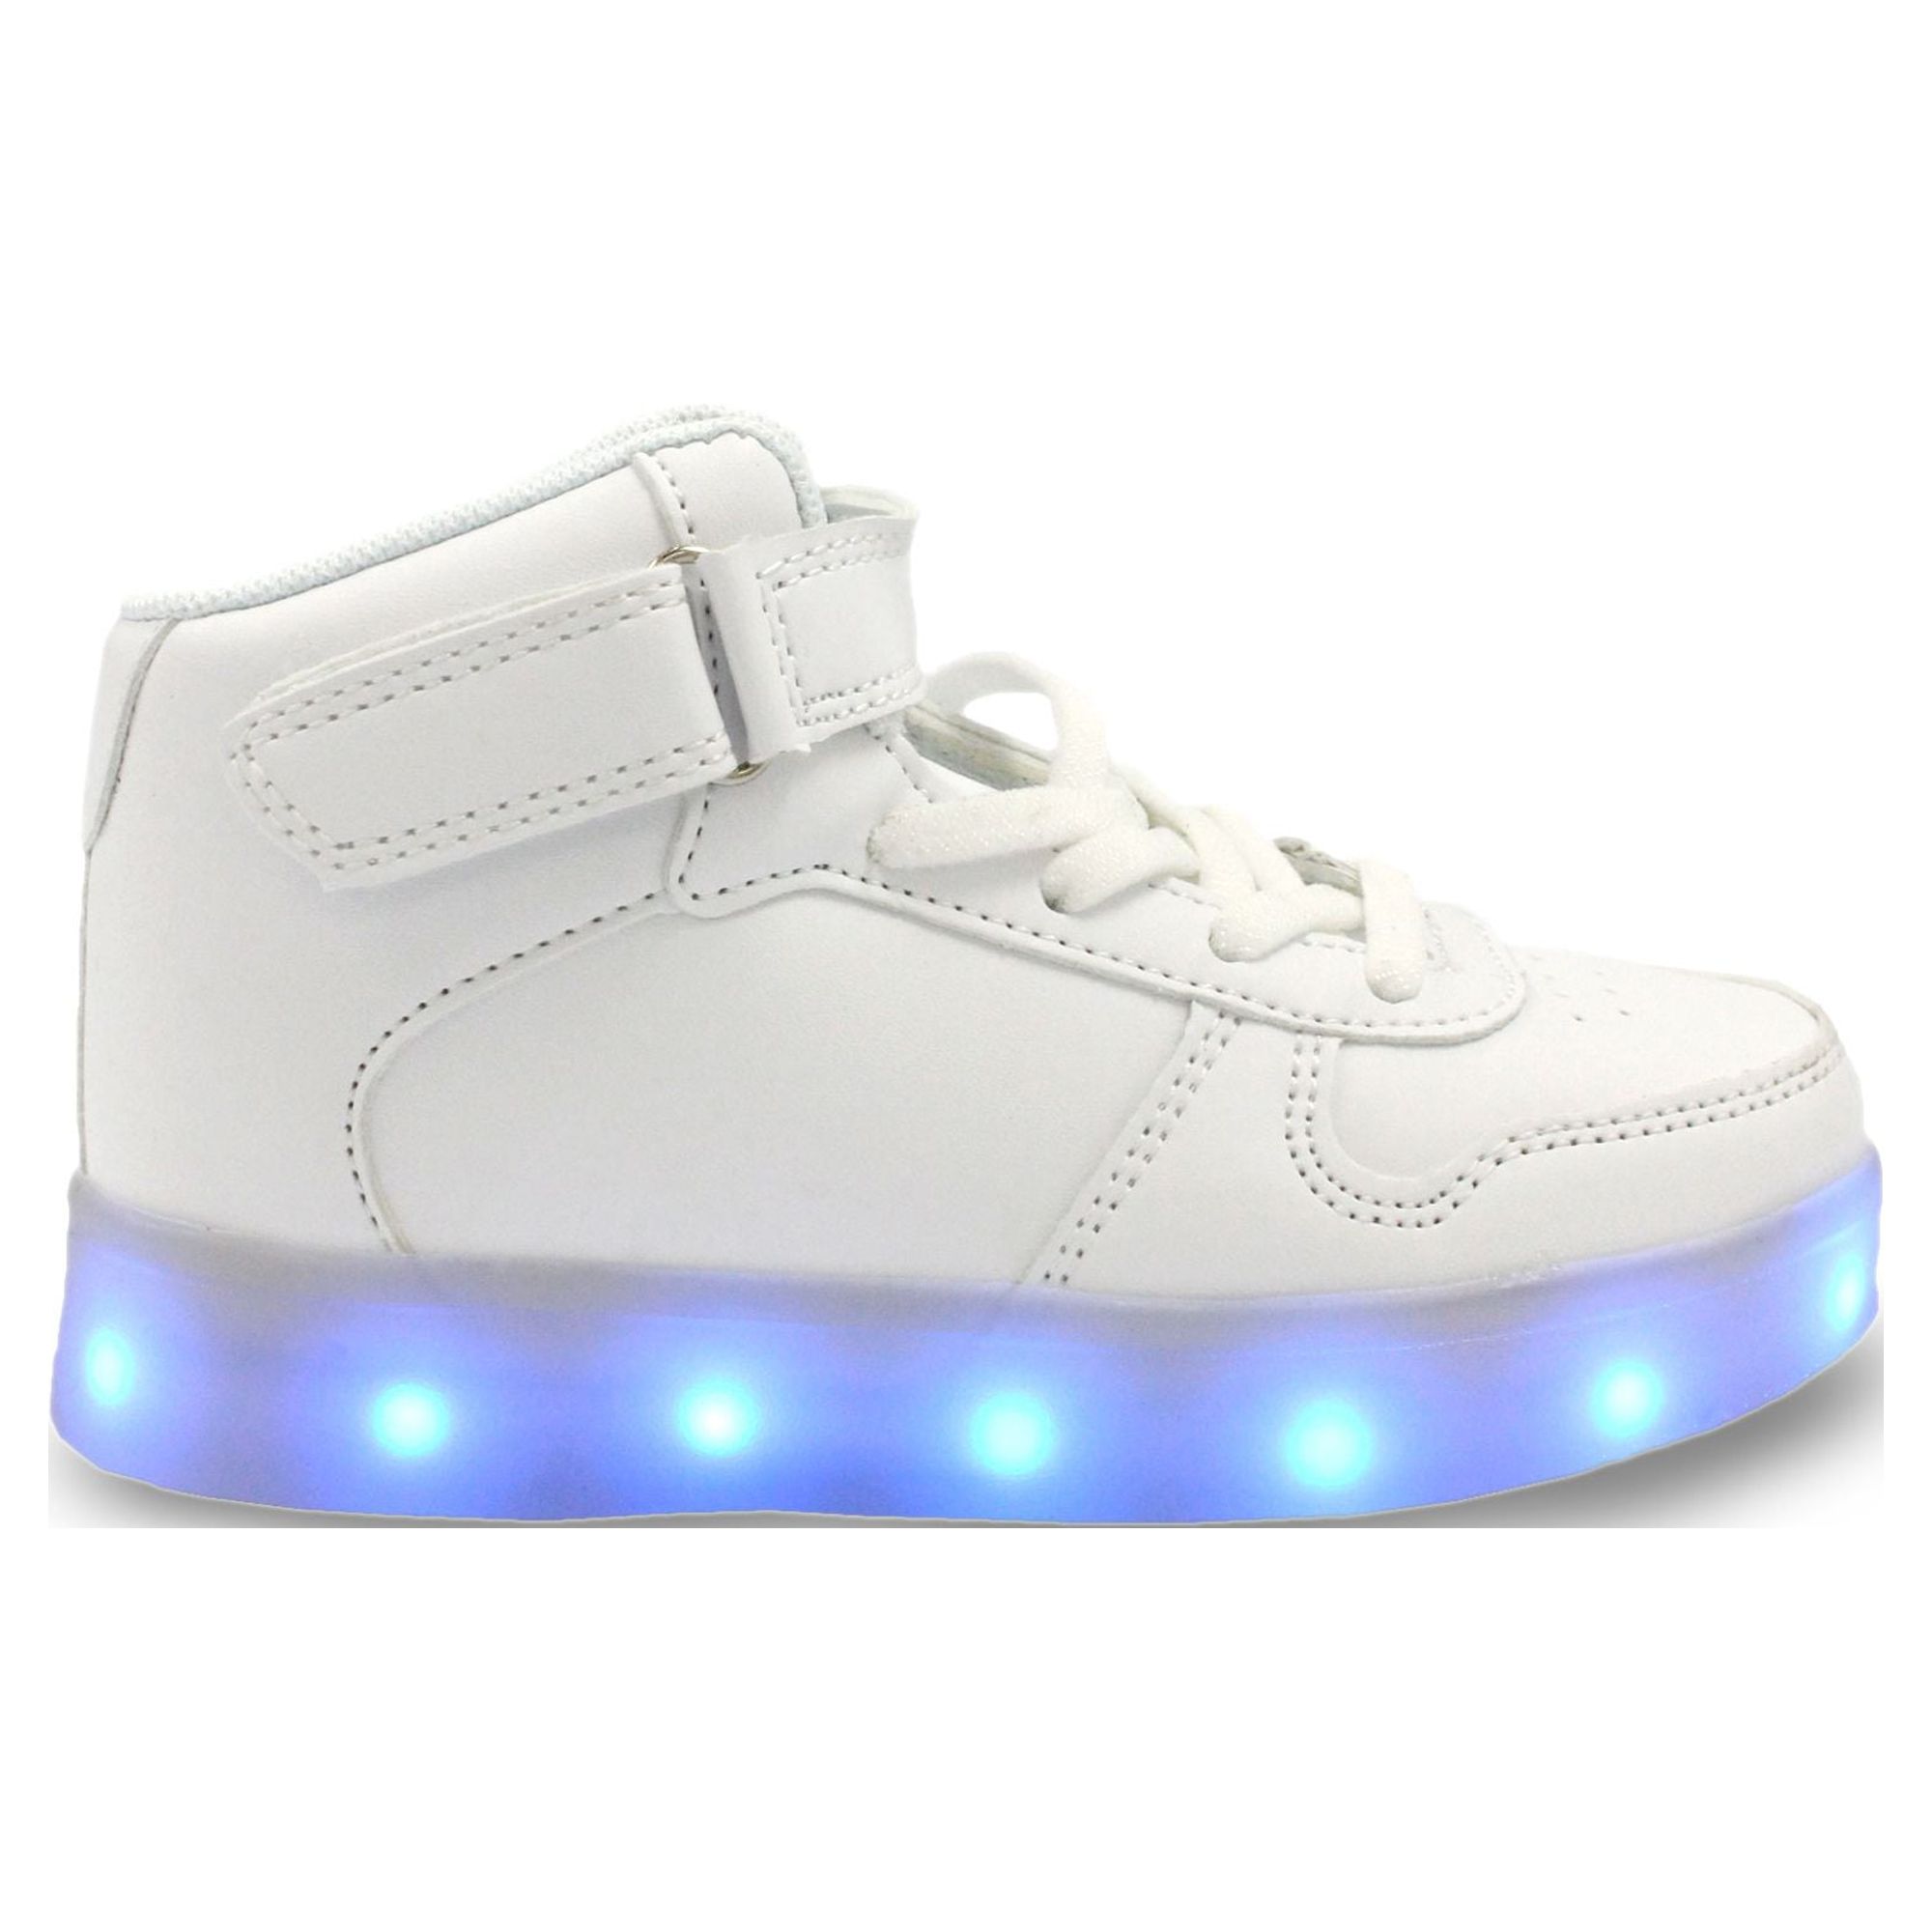 Family Smiles LED Light Up Sneakers Kids High Top Boys Girls Unisex Strap Lace Up Shoes White Toddler US 10.5 / EU 27.5 - image 1 of 7